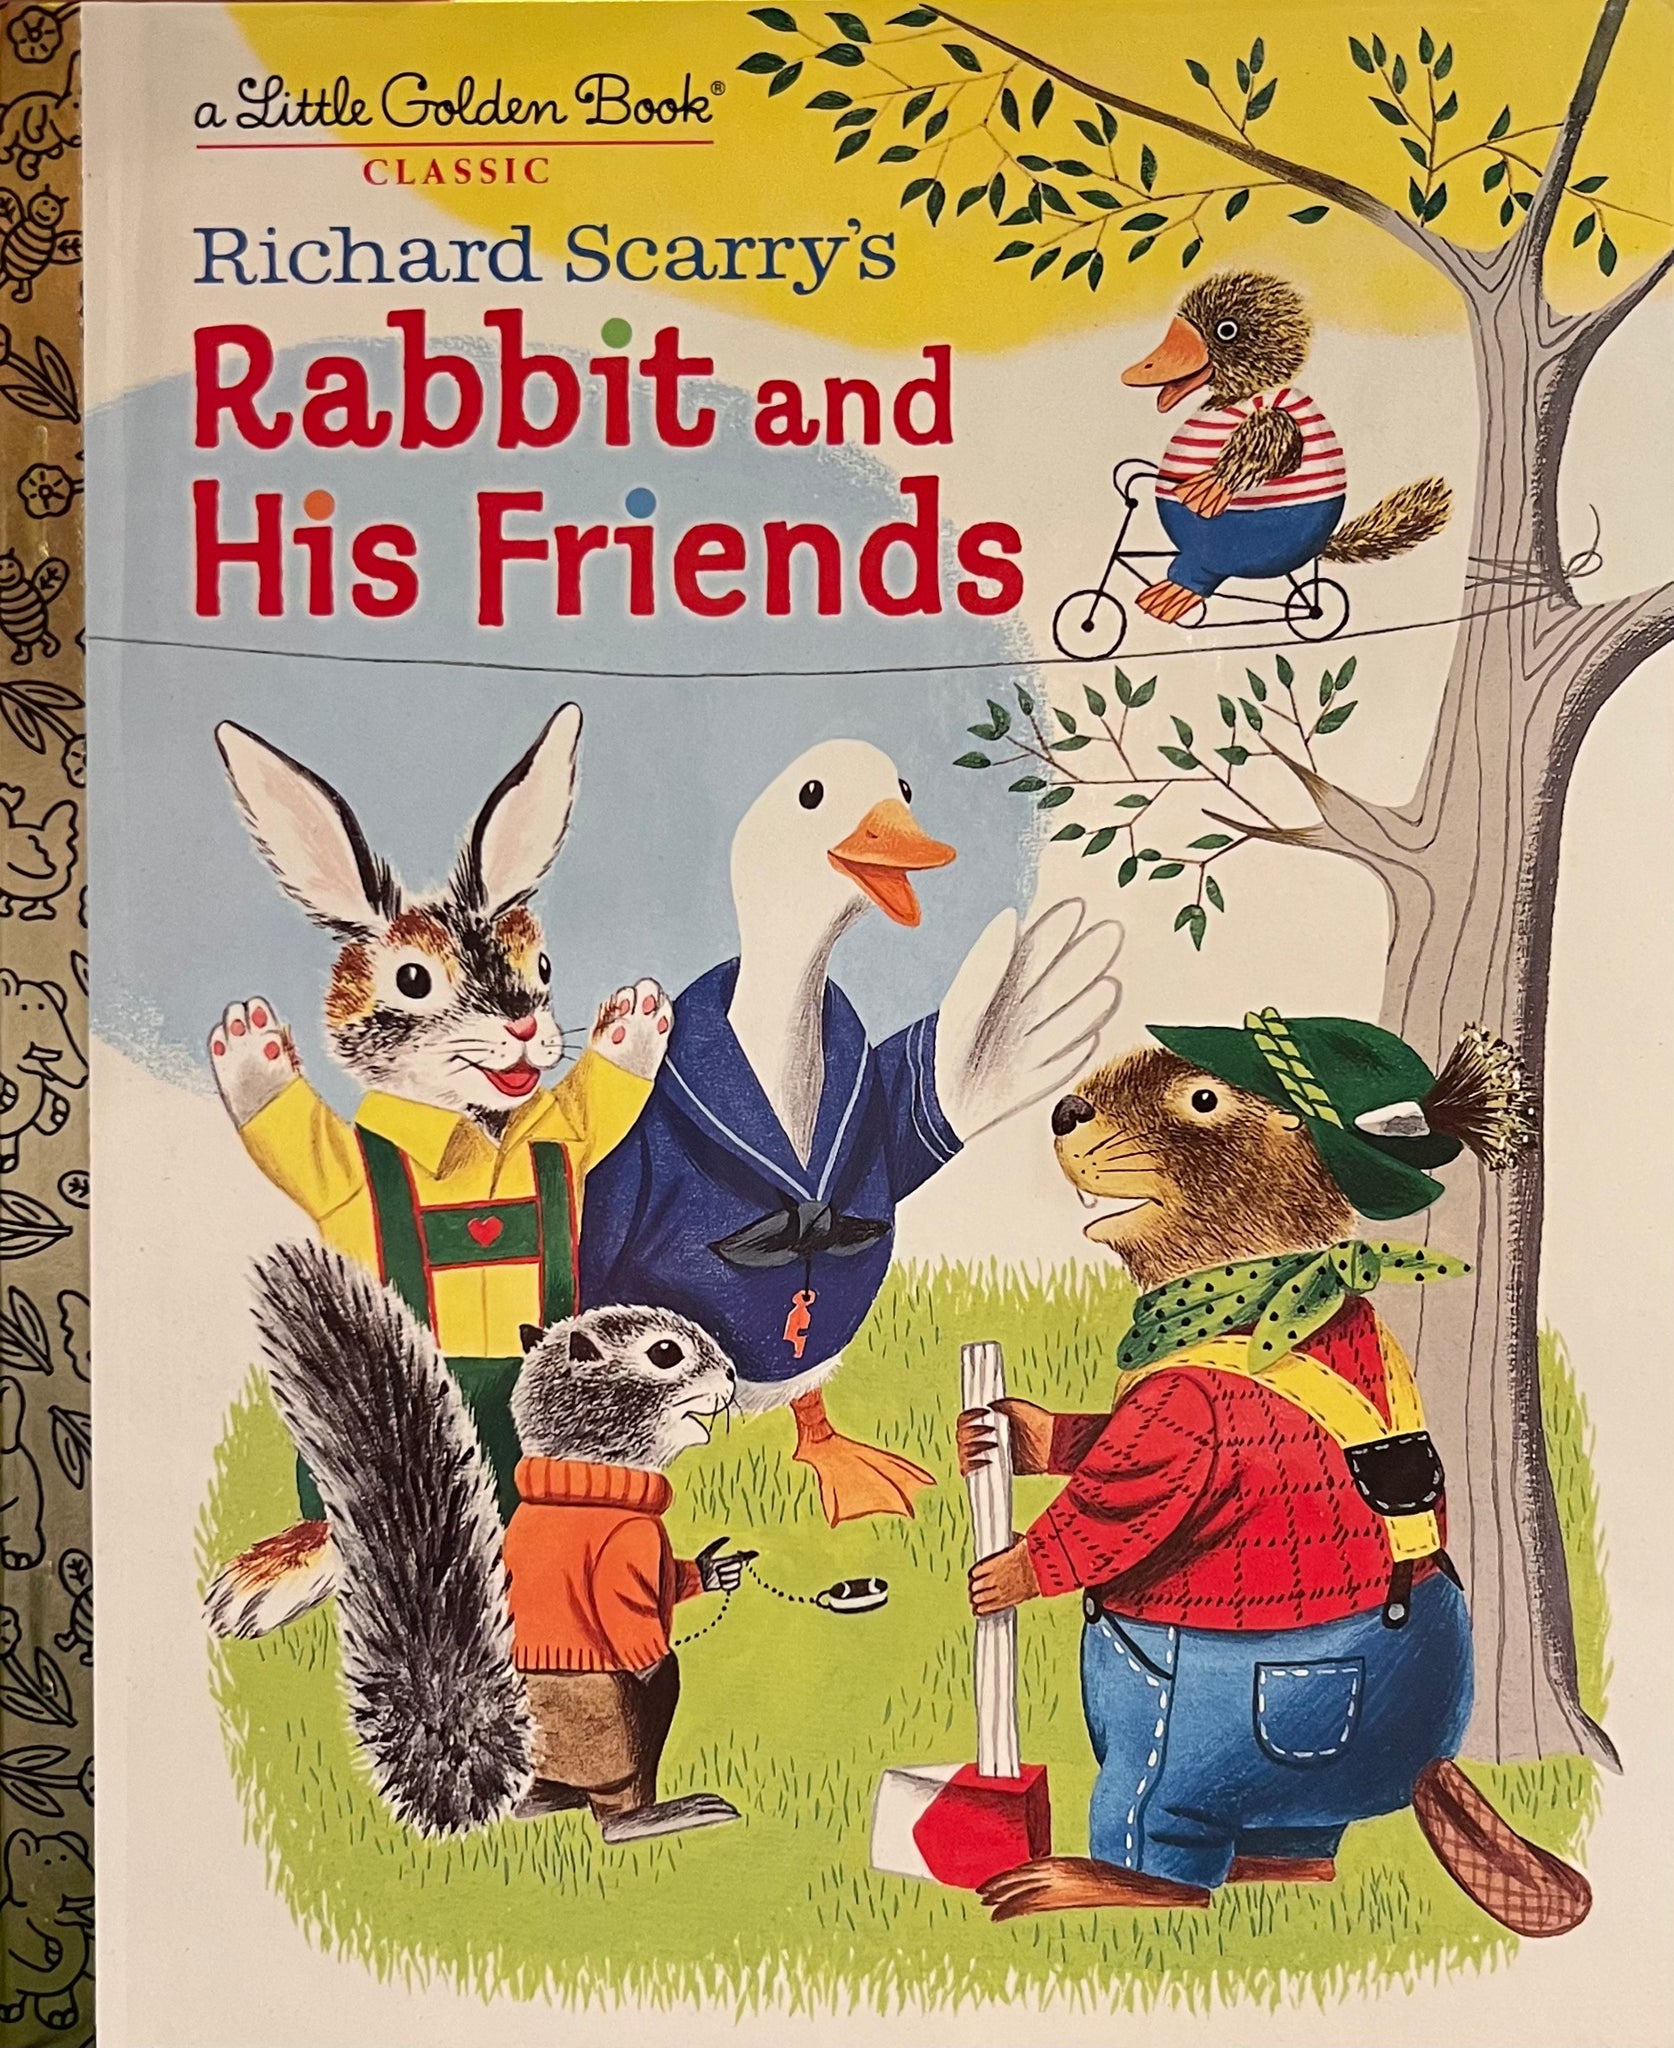 Rabbit and His Friends, Richard Scarry